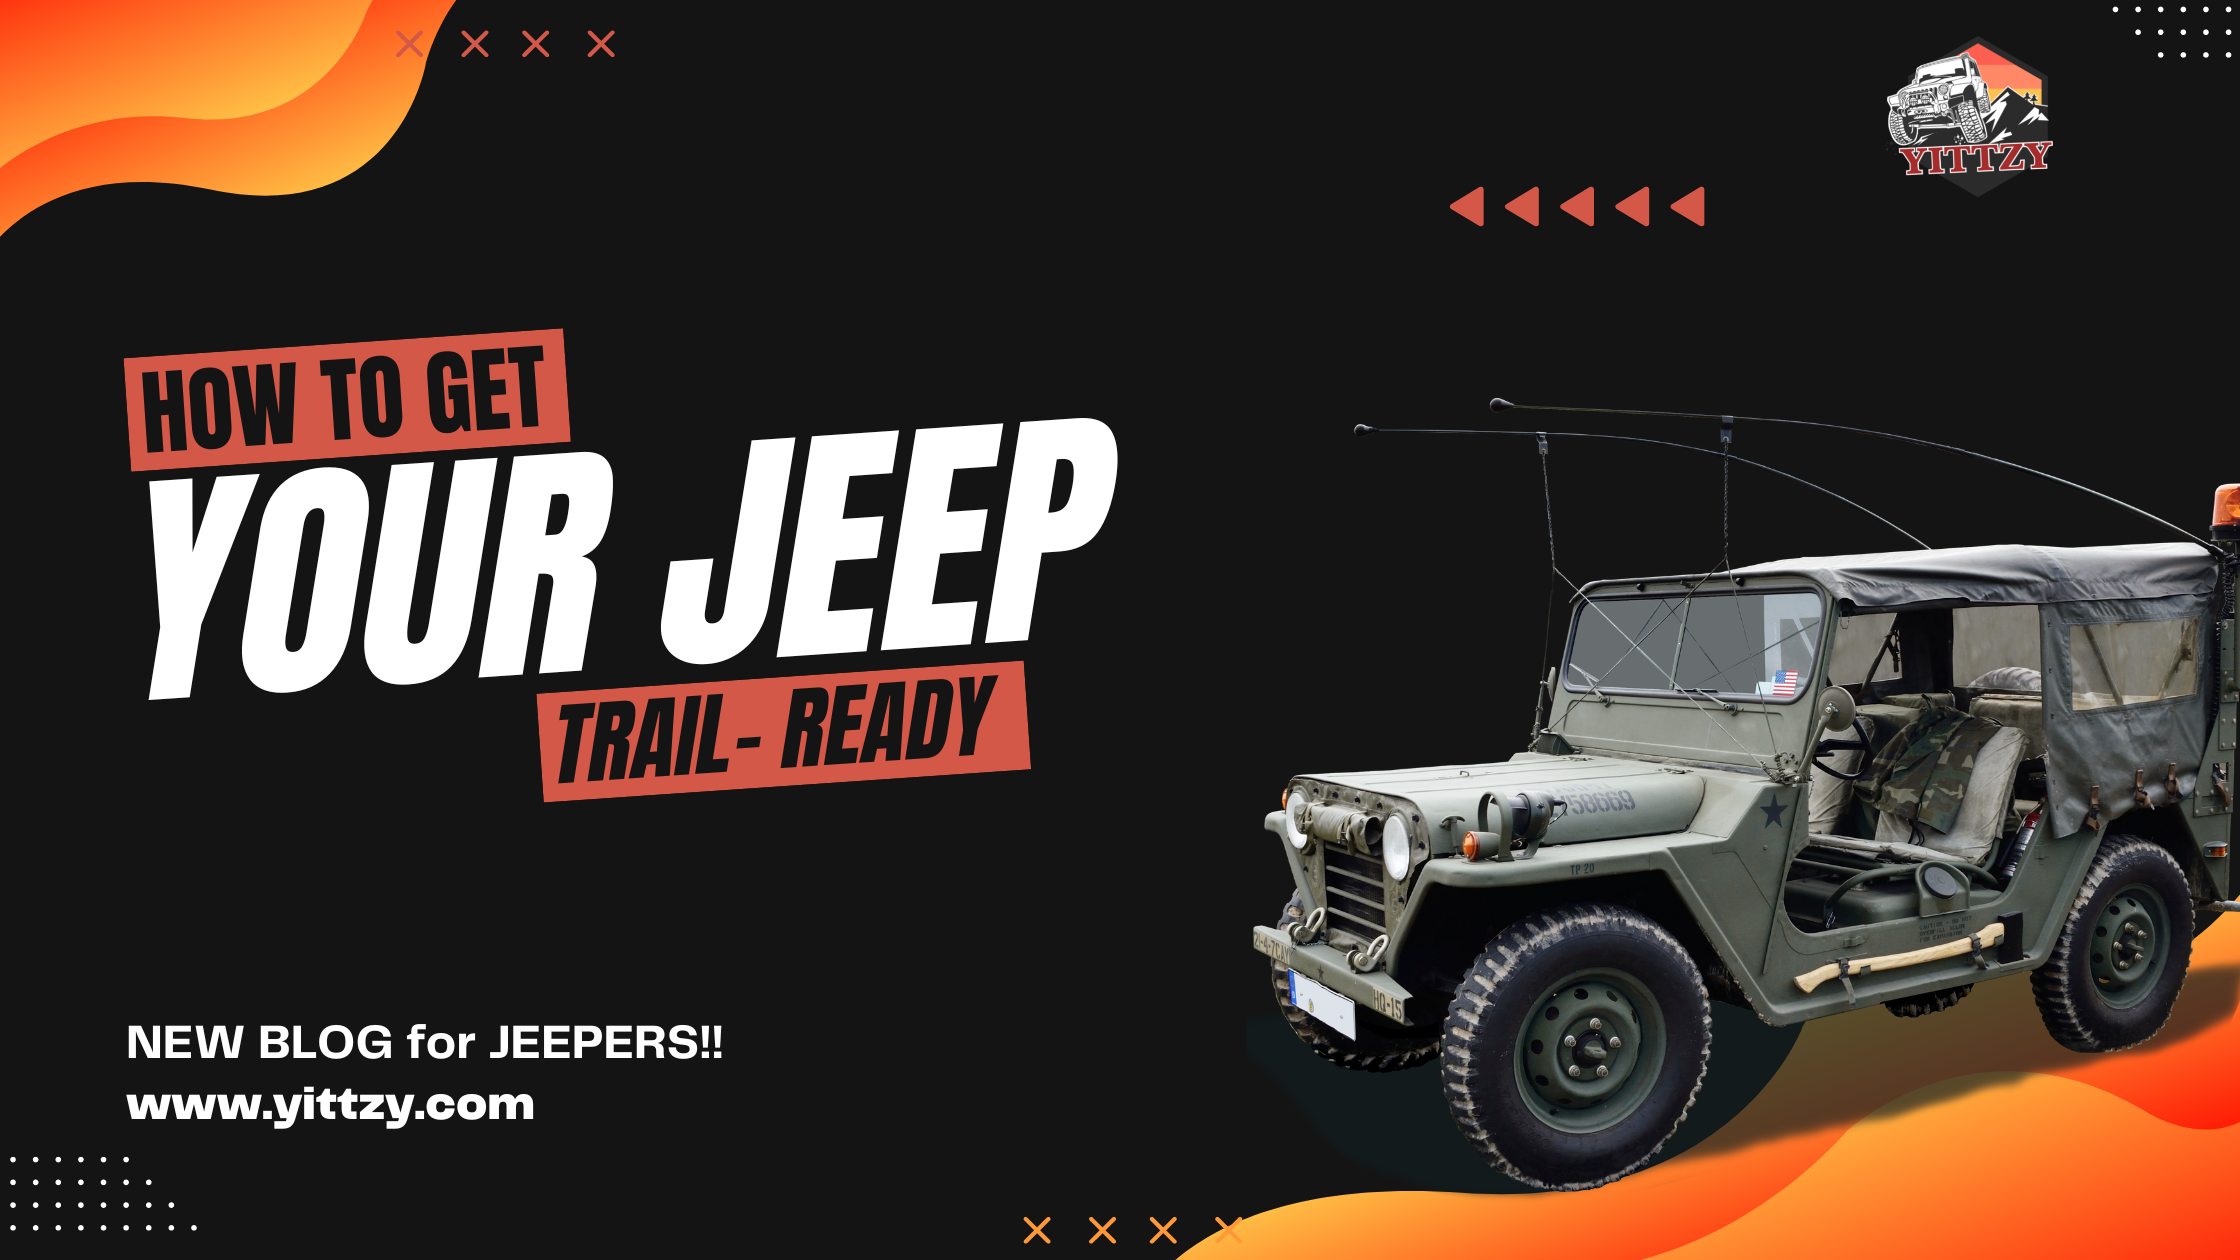 How to get your Jeep trail-ready